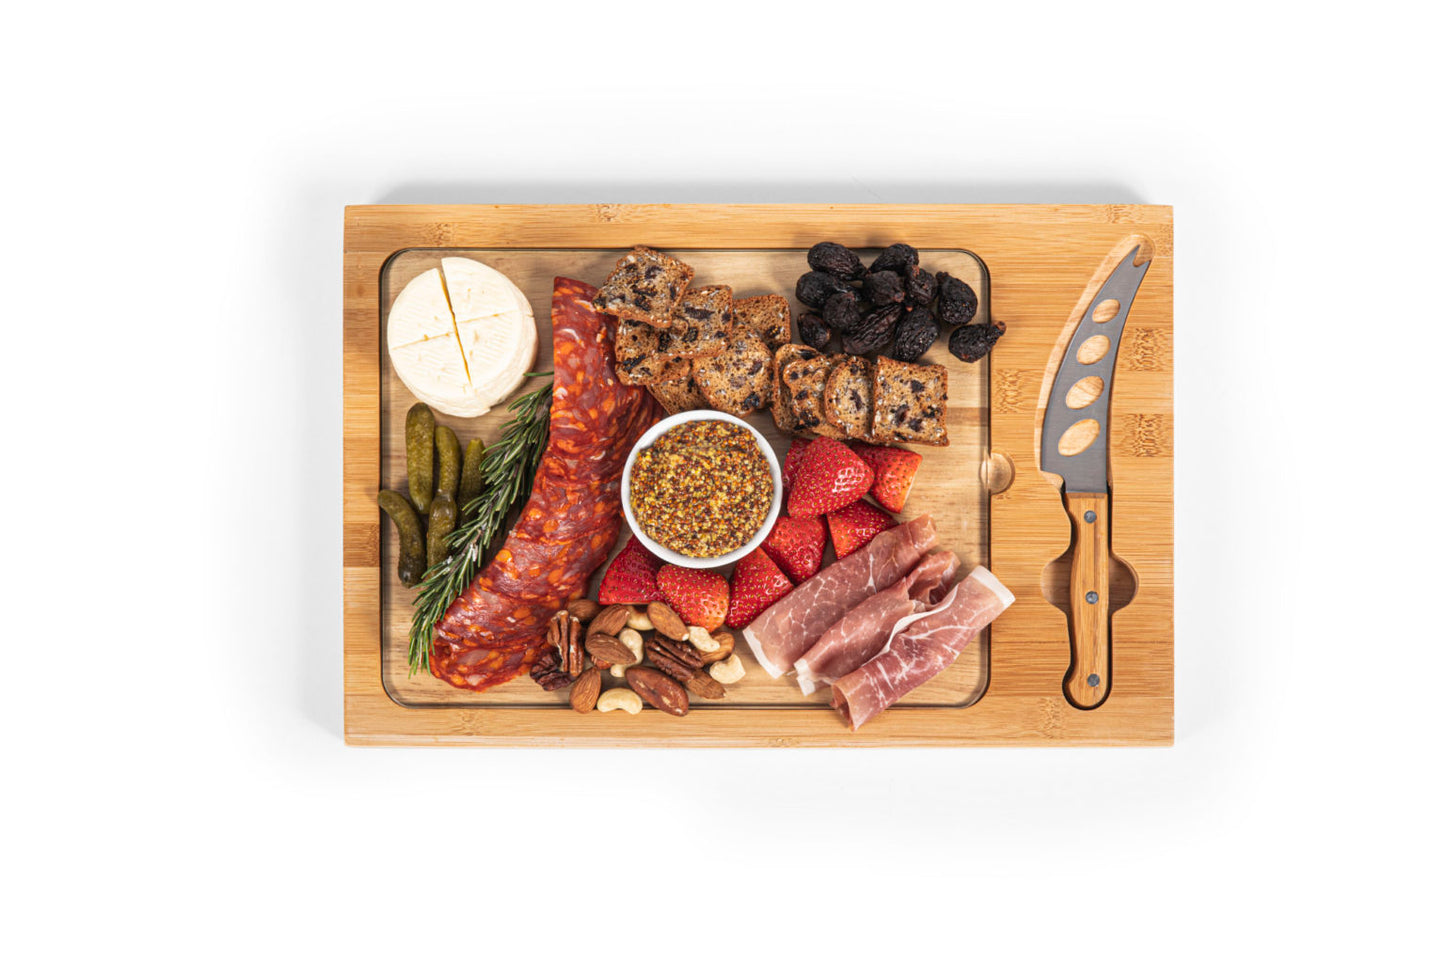 Appalachian State Mountaineers – Icon Glass Top Cutting Board & Knife Set by Picnic Time